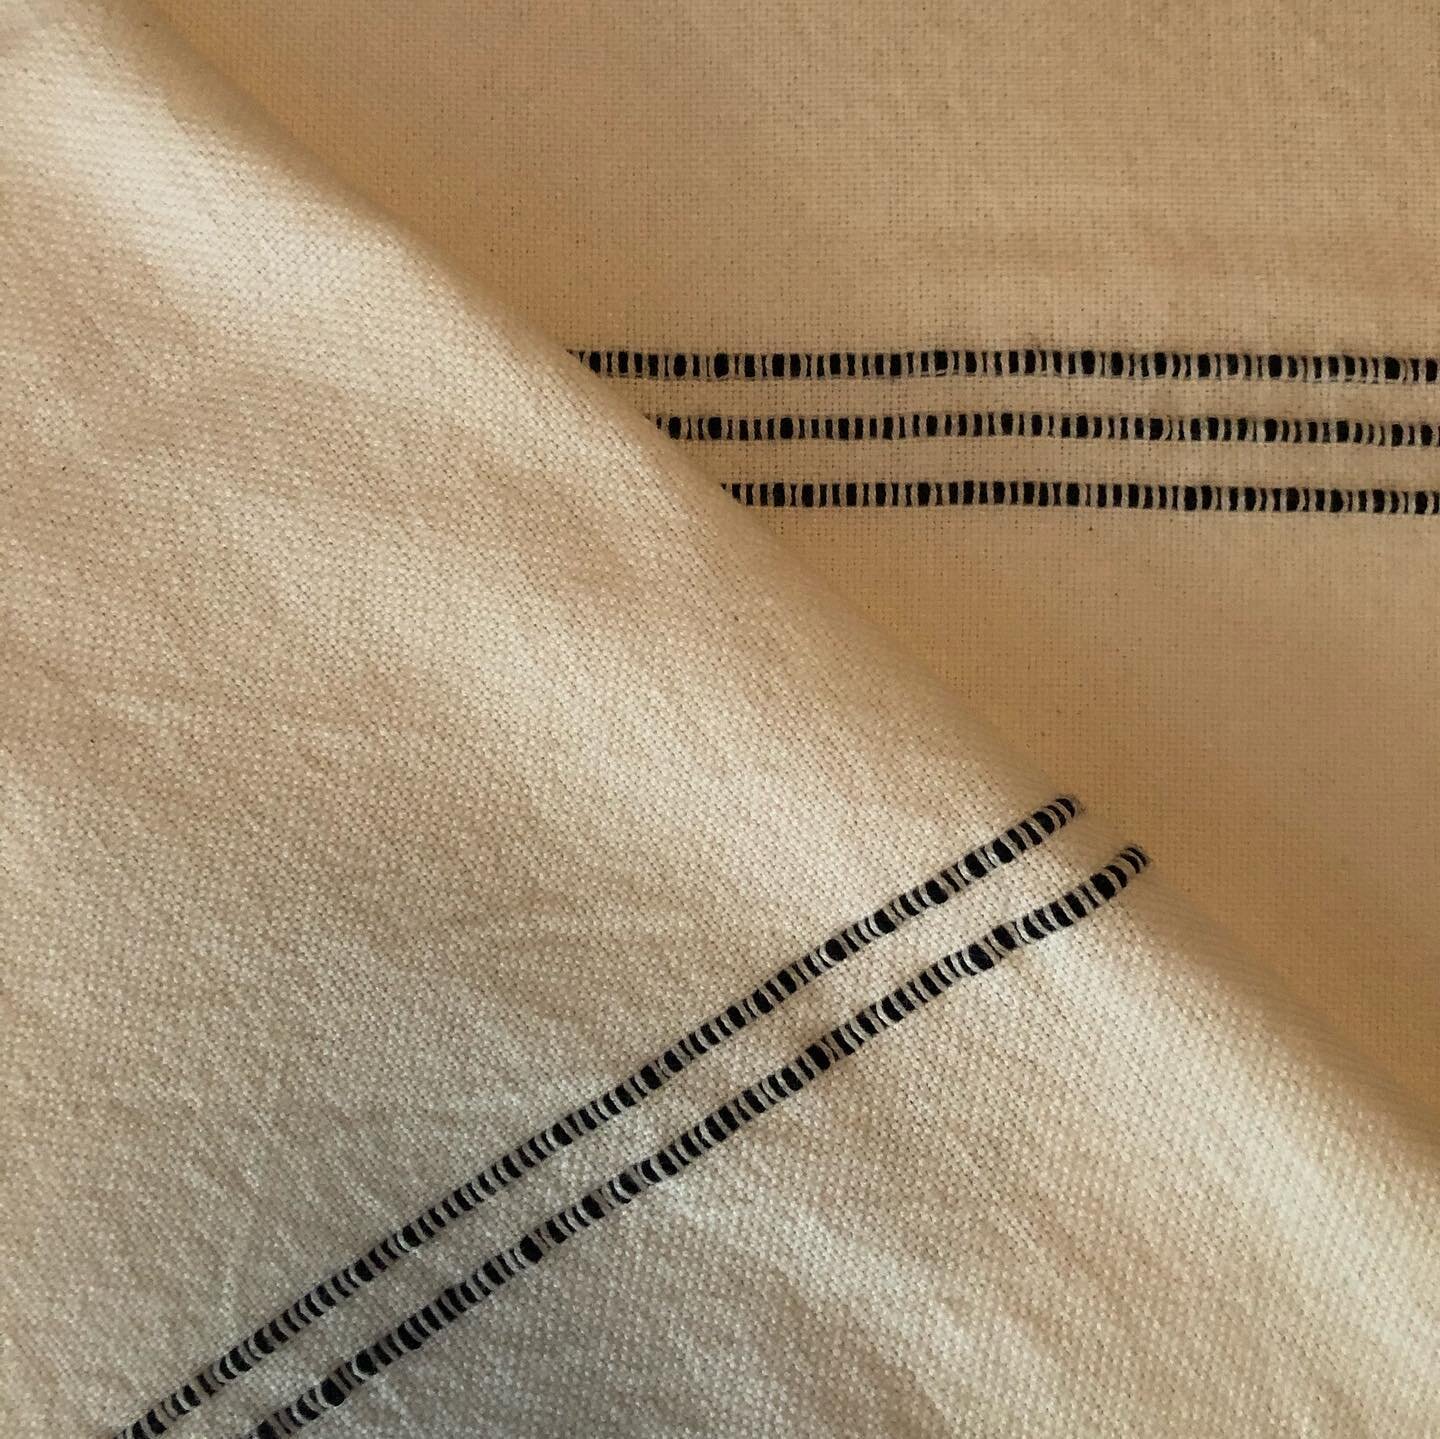 This beautiful offset stripe coverlet - Handloomed on traditional wooden looms in Kerala, India, in a fair trade certified environment and then cut and sewn to beautiful effect. Honored to have it grace the studio of Carnegie Hill Massage

Courtesy o